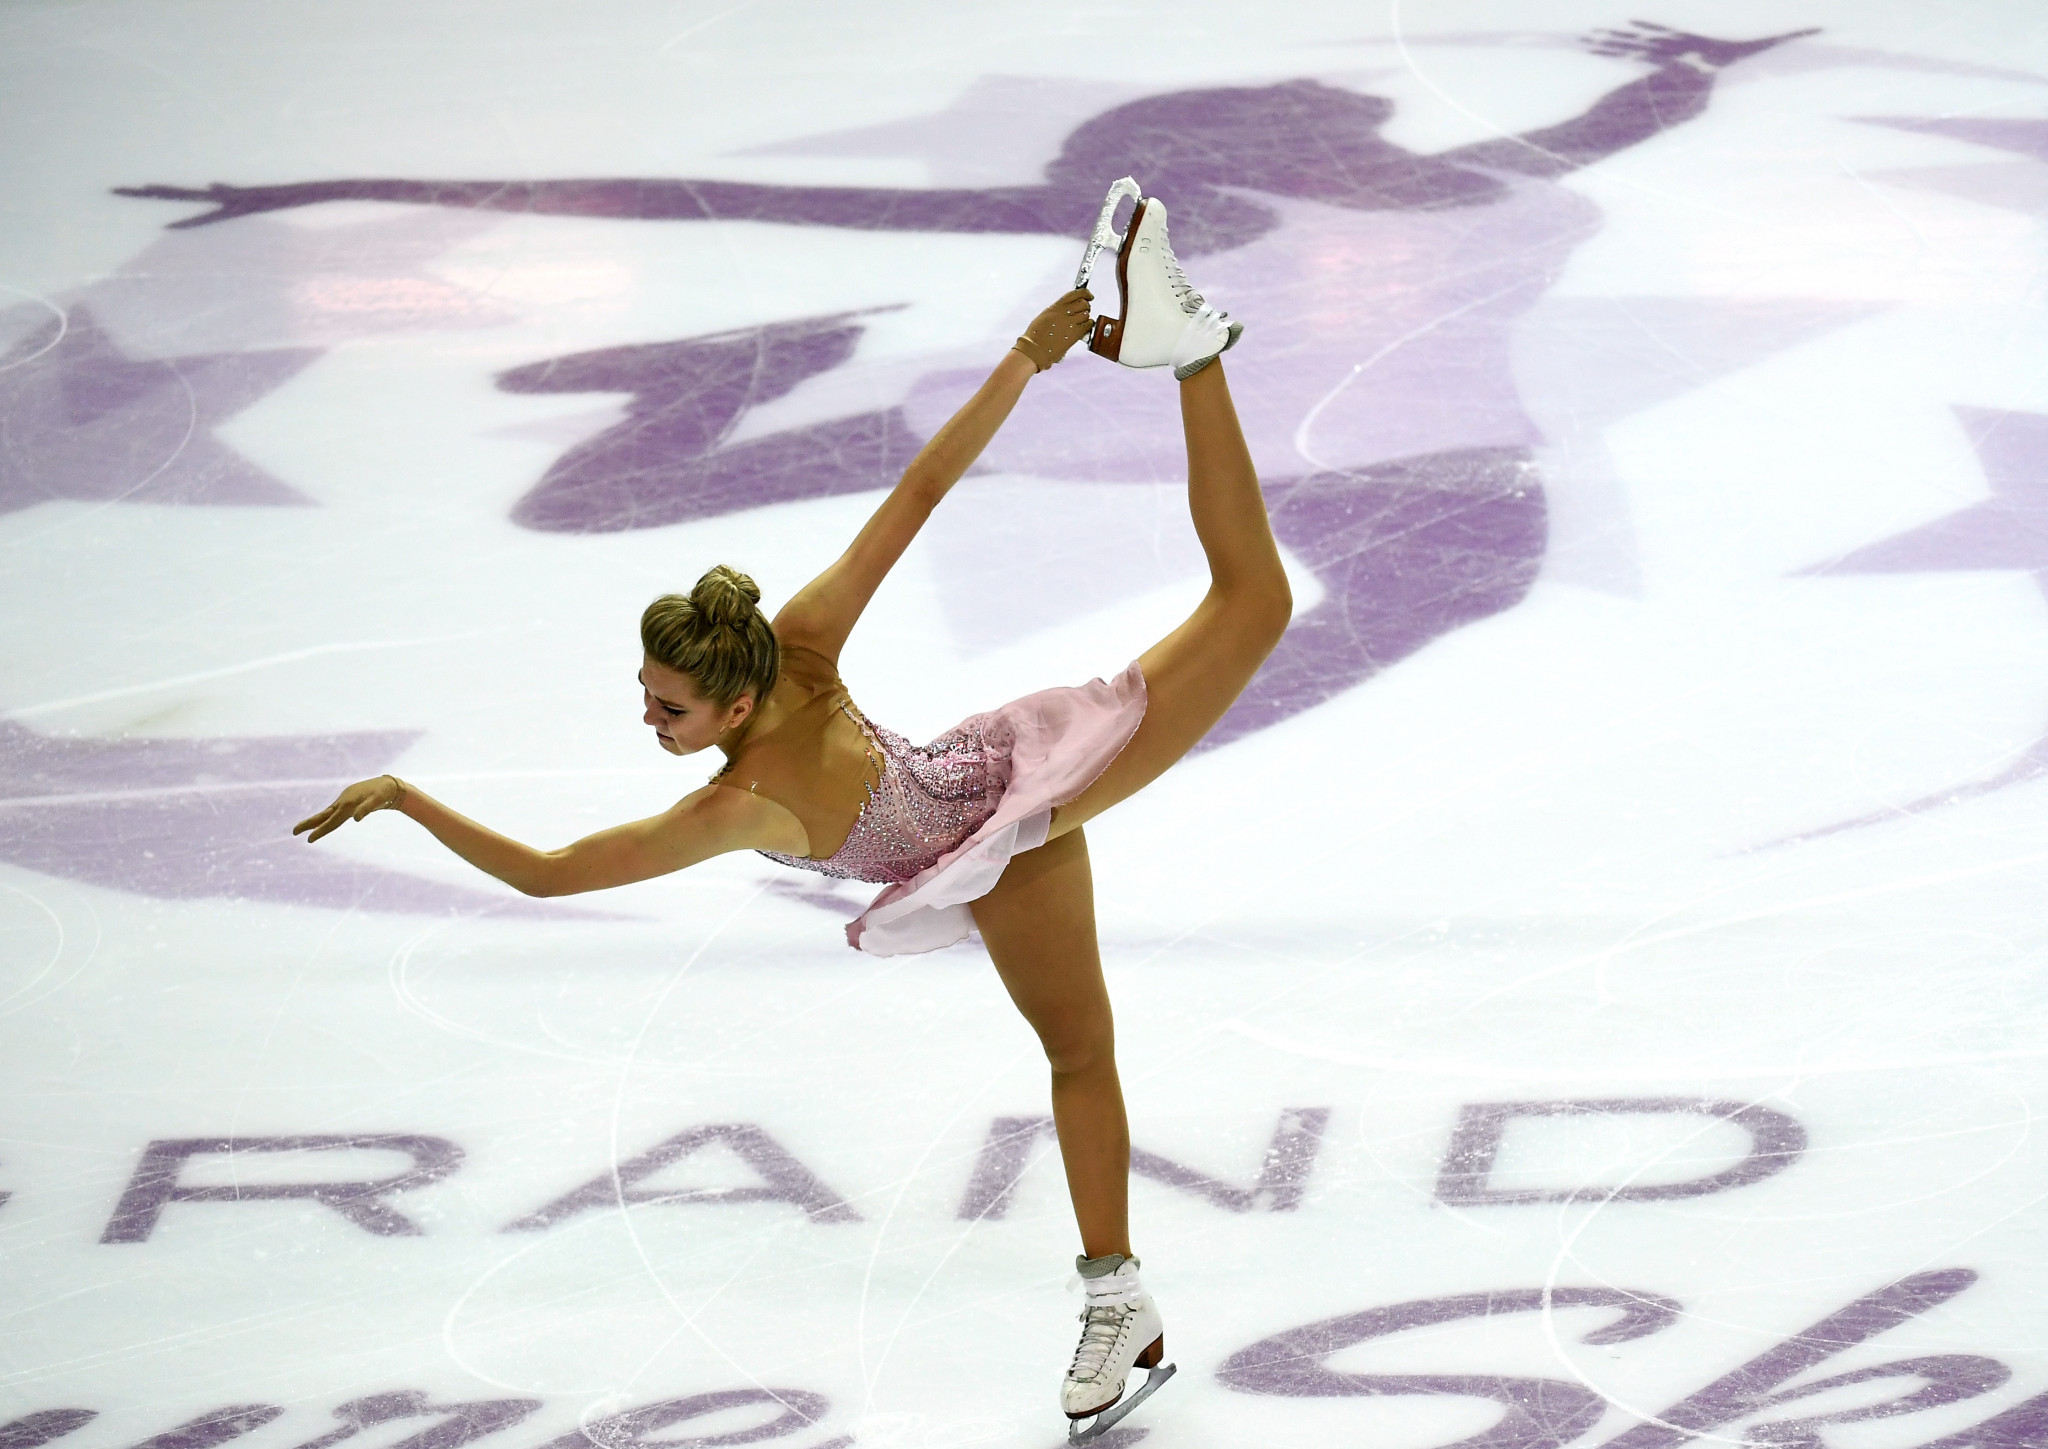 Elena Radionova earned bronze at the World Championships in 2015 ©Getty Images